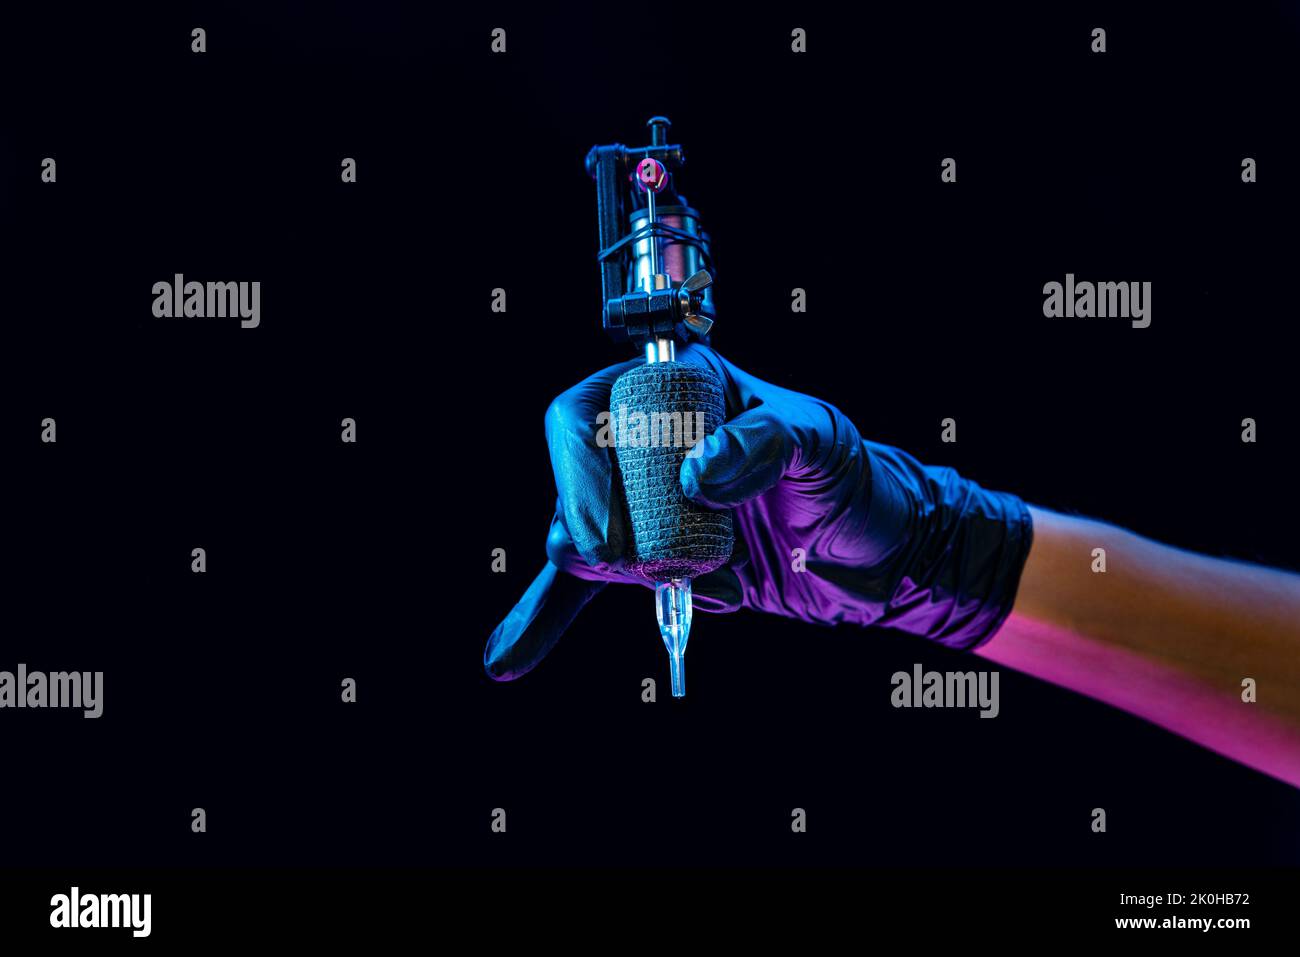 Closeup of tattooer master's hand in black glove holding machine for making tattoo art on body isolated on dark background in neon light. Stock Photo